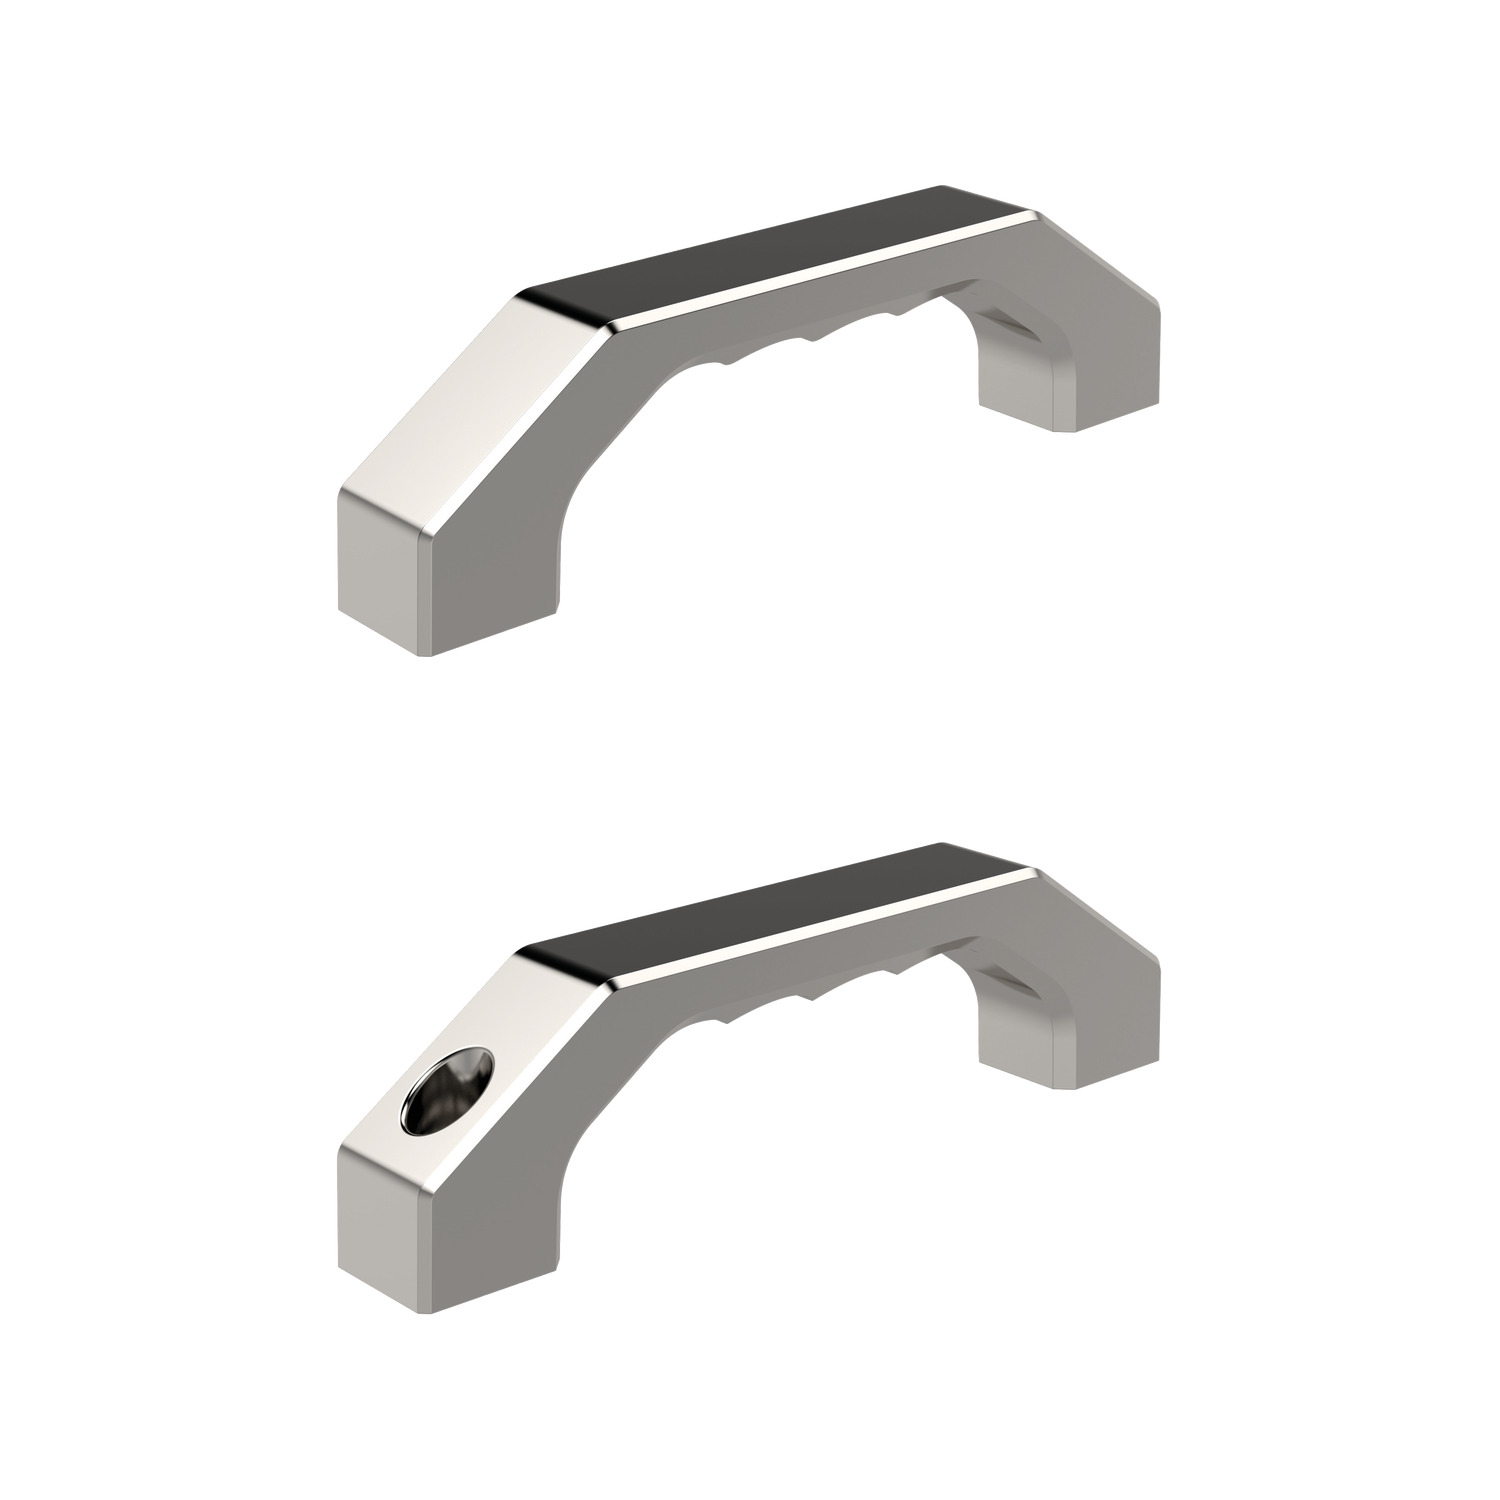 Pull Handles An angular D handle with front and rear mounting versions all made through stainless steel precision casting.